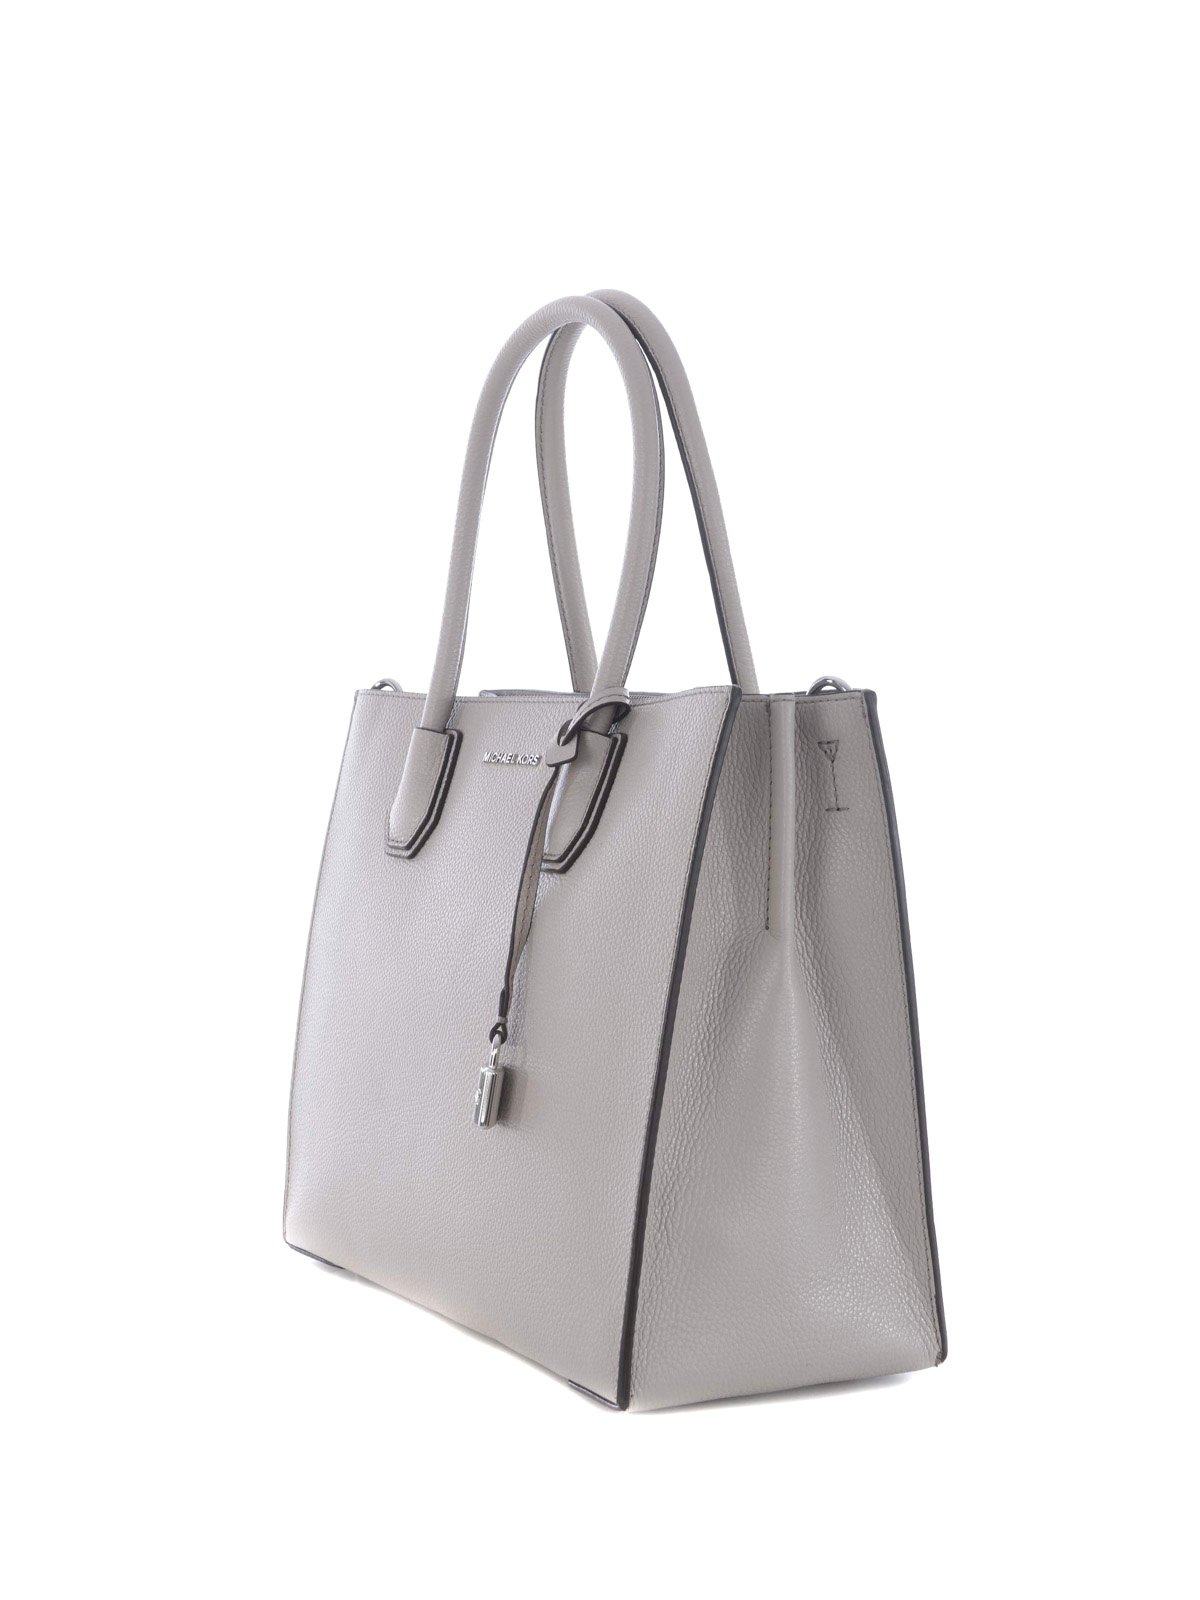 Totes bags Michael Kors - Mercer large cement leather tote